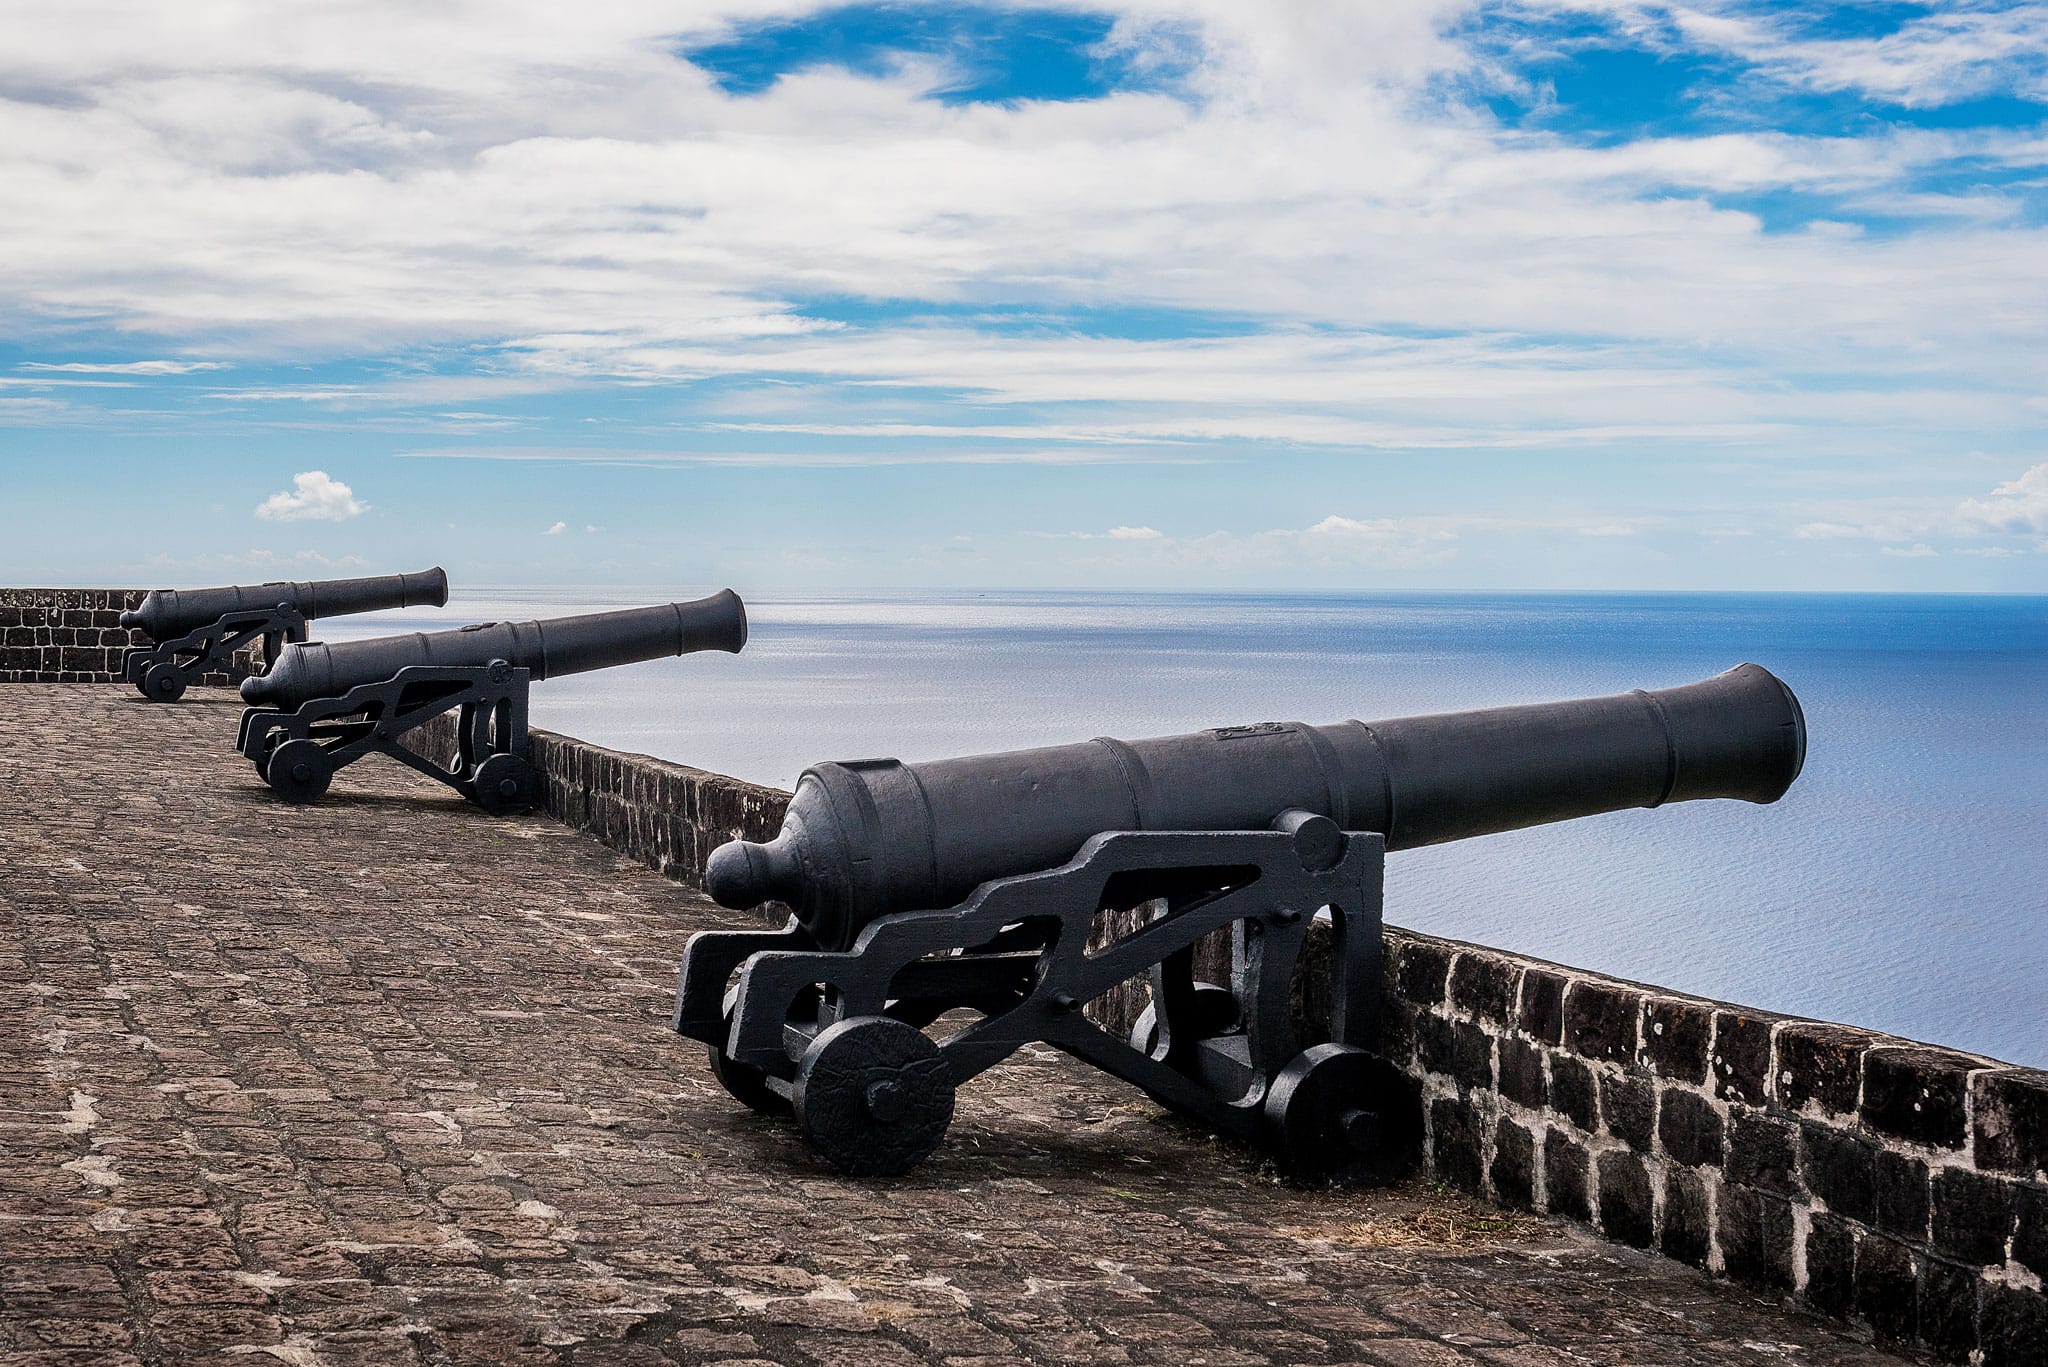 Brimstone Hill Fortress cannons by Patrick Bennett